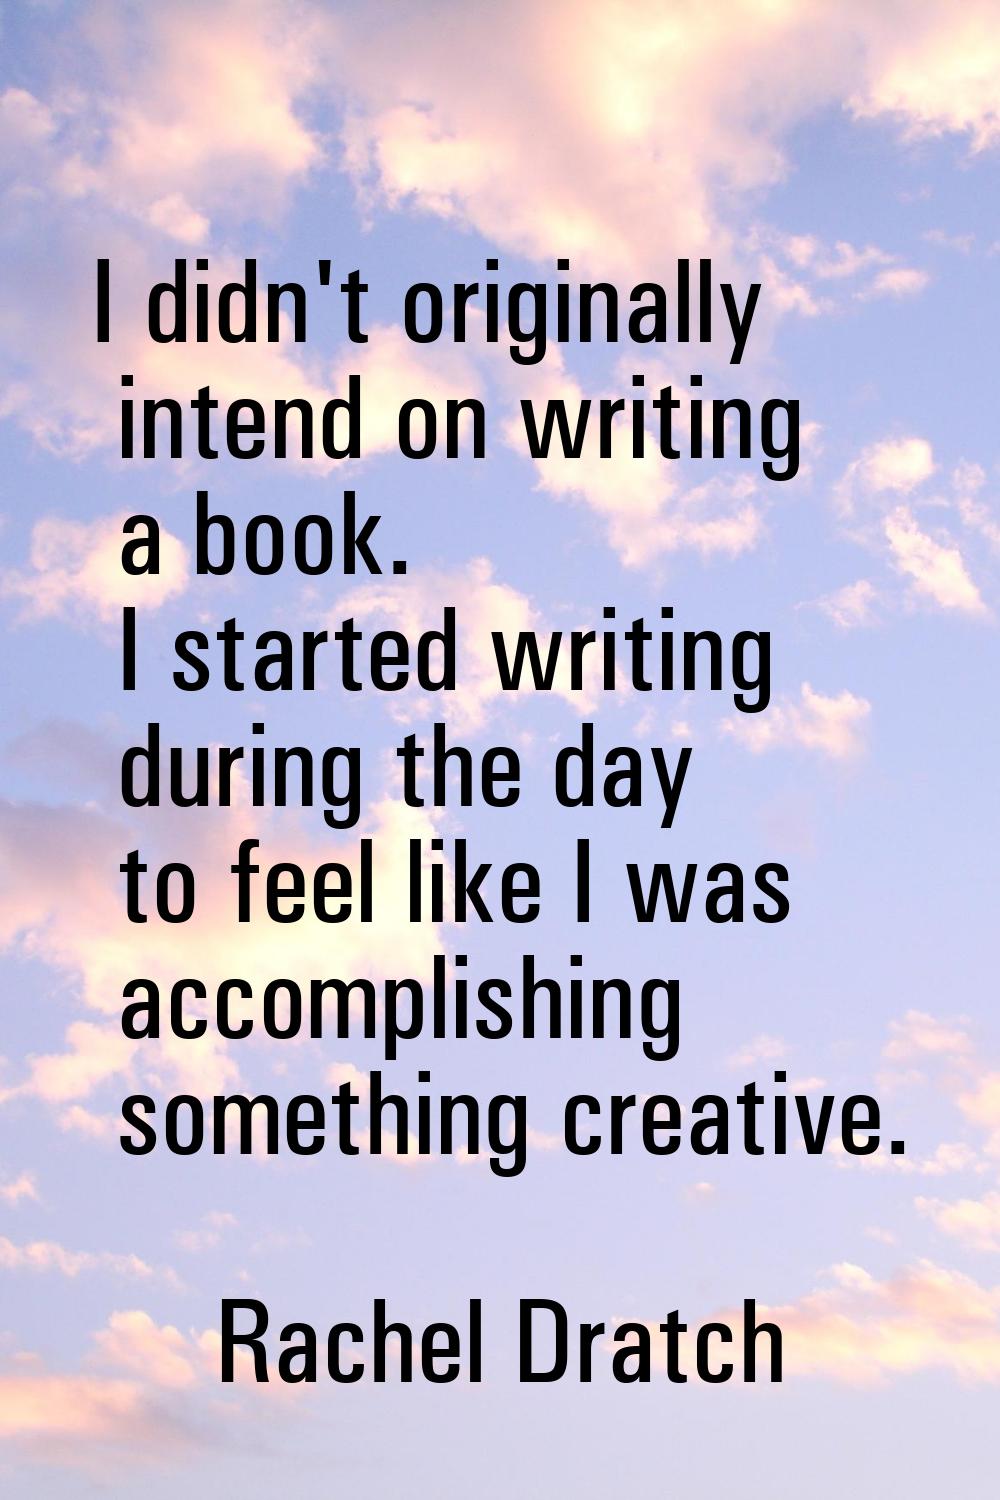 I didn't originally intend on writing a book. I started writing during the day to feel like I was a